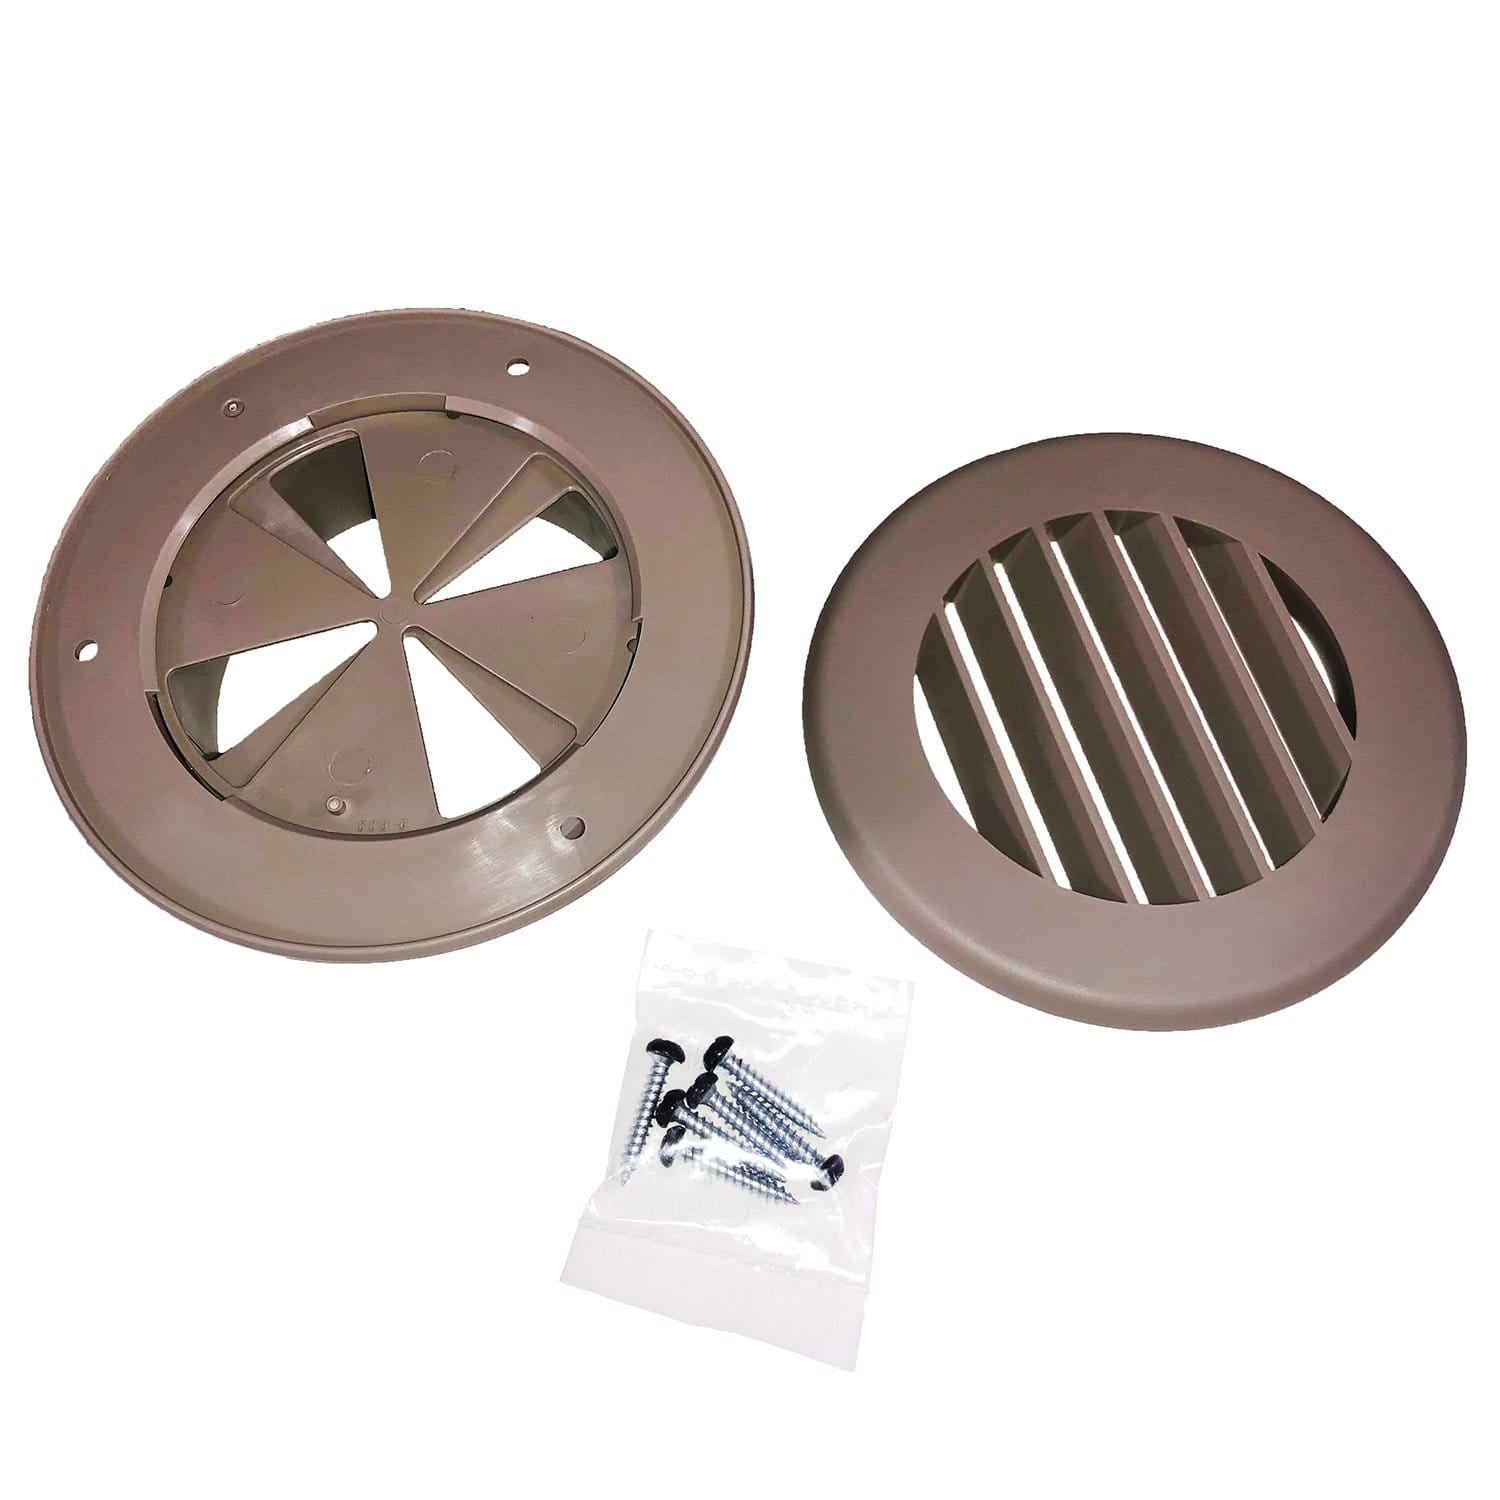 Thetford 94269 (601-015-94269) B&B Molders 4" Thermovent Ducted Heat Vent with Damper, Tan